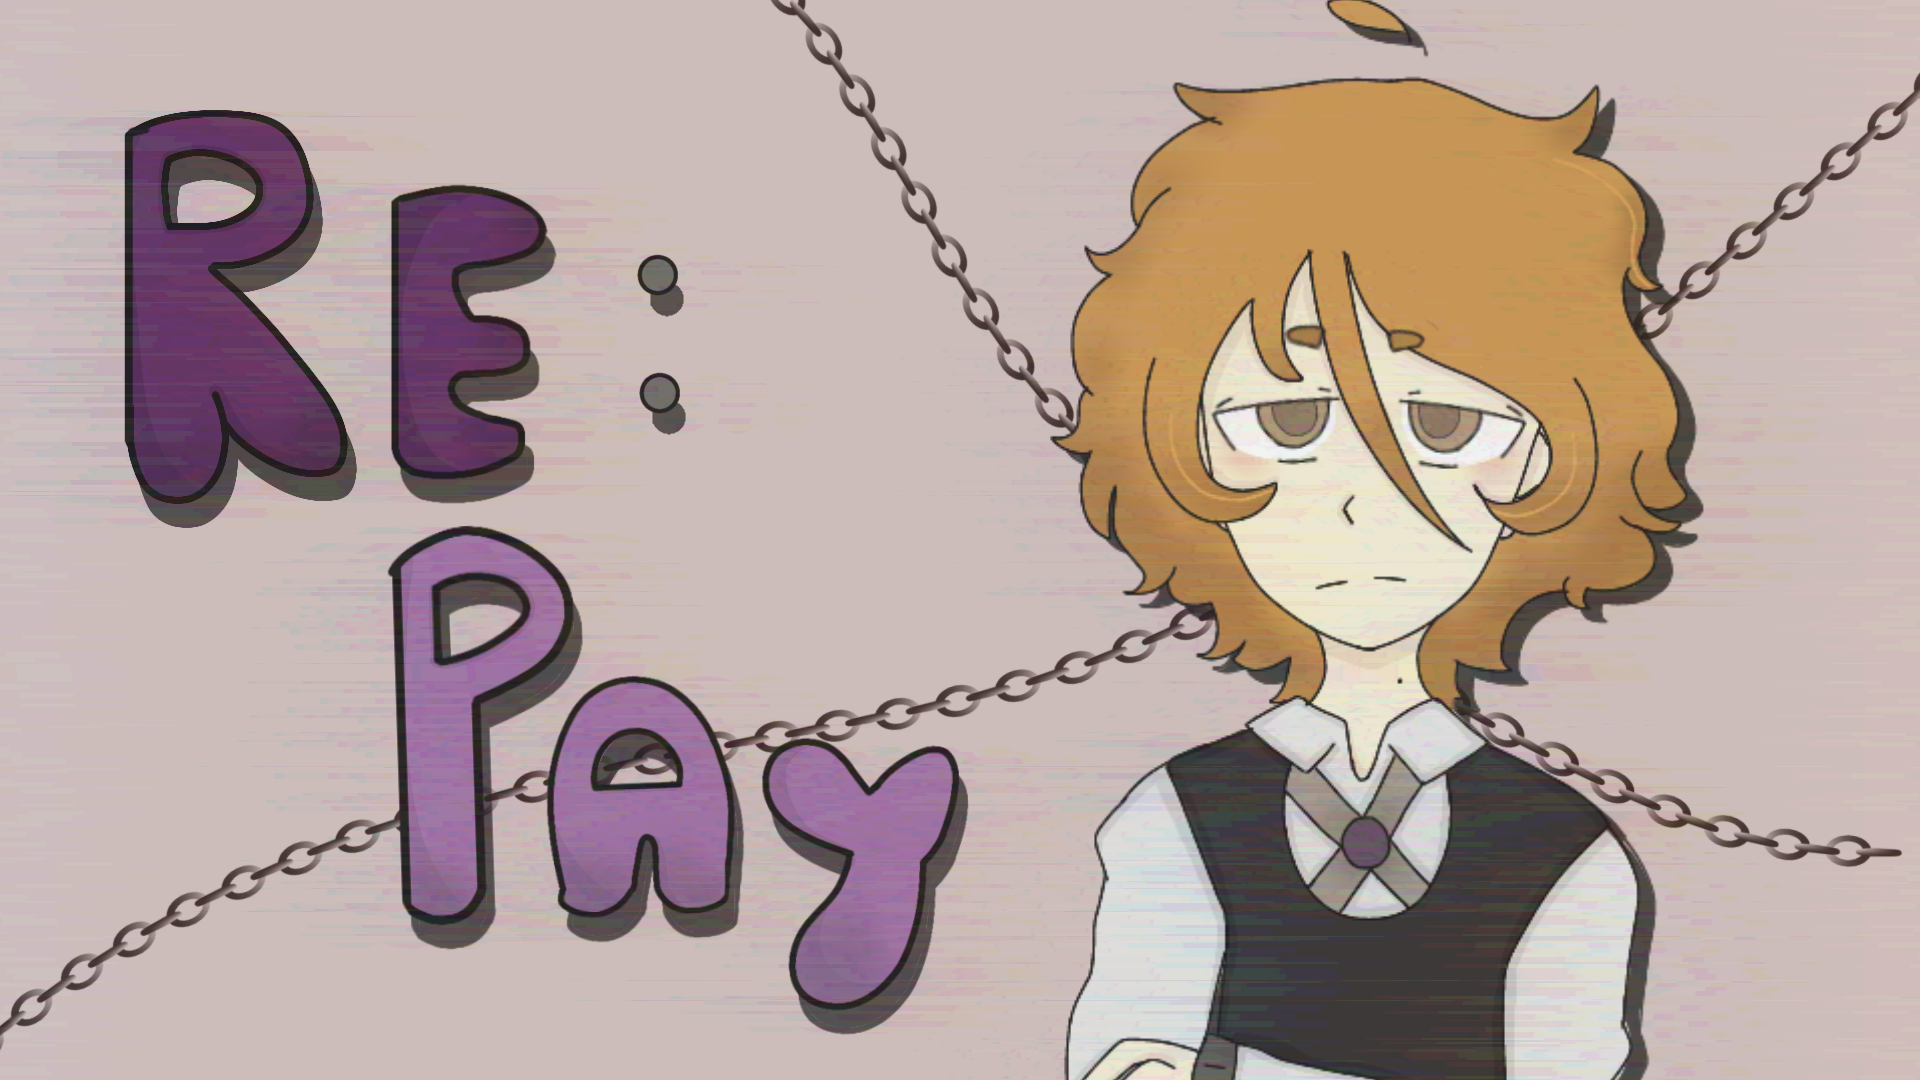 Re:Pay